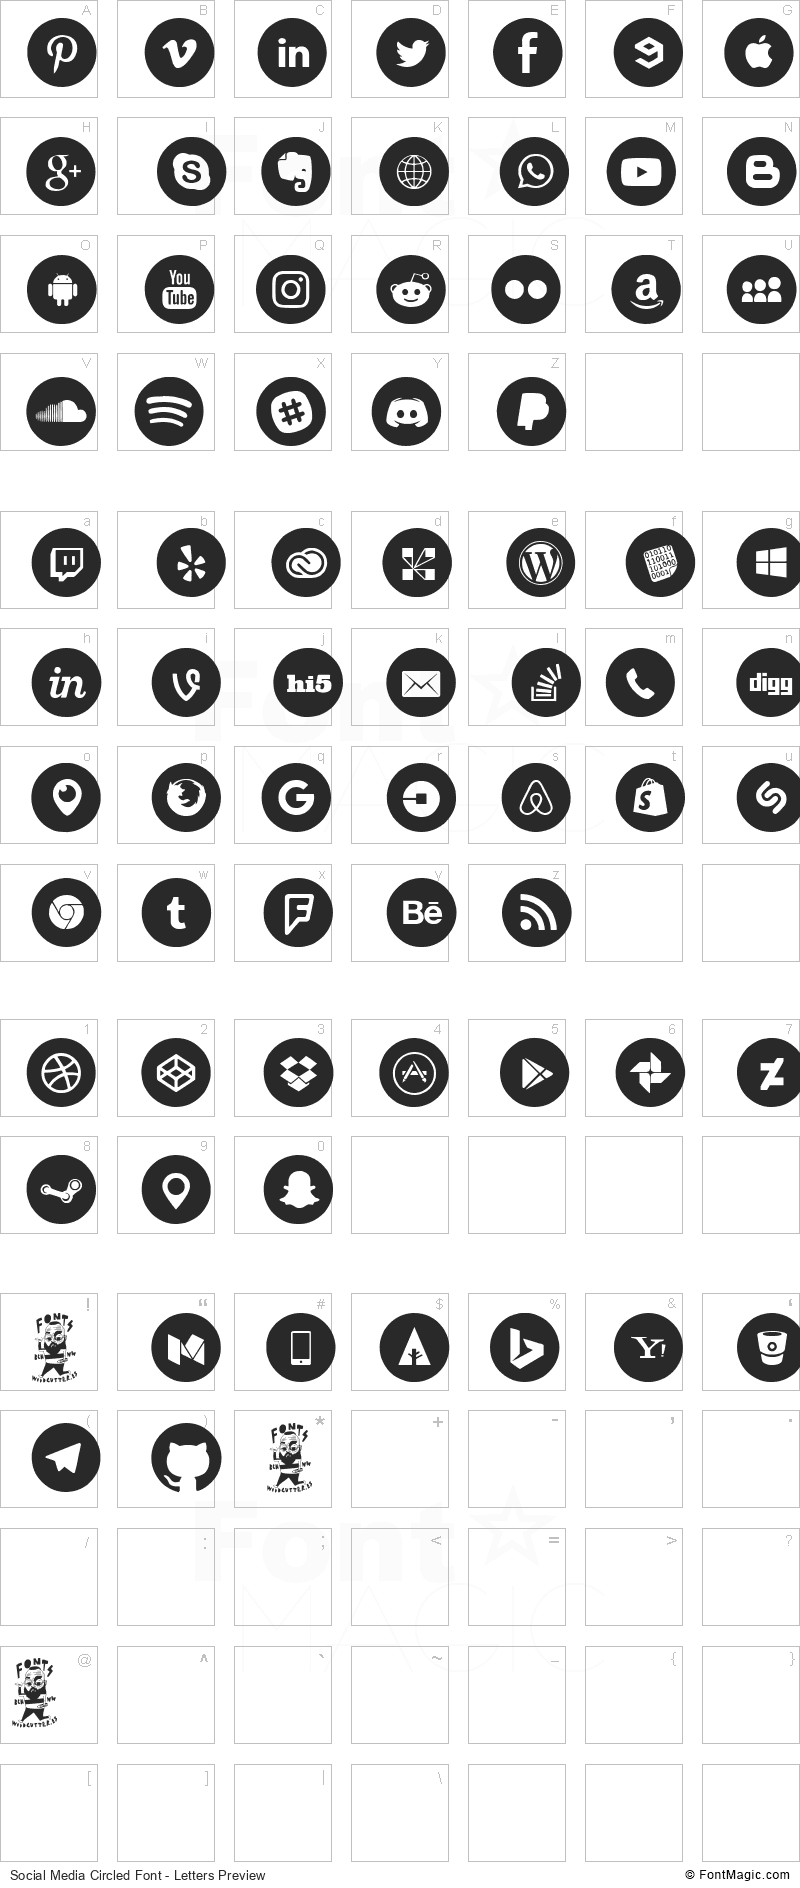 Social Media Circled Font - All Latters Preview Chart